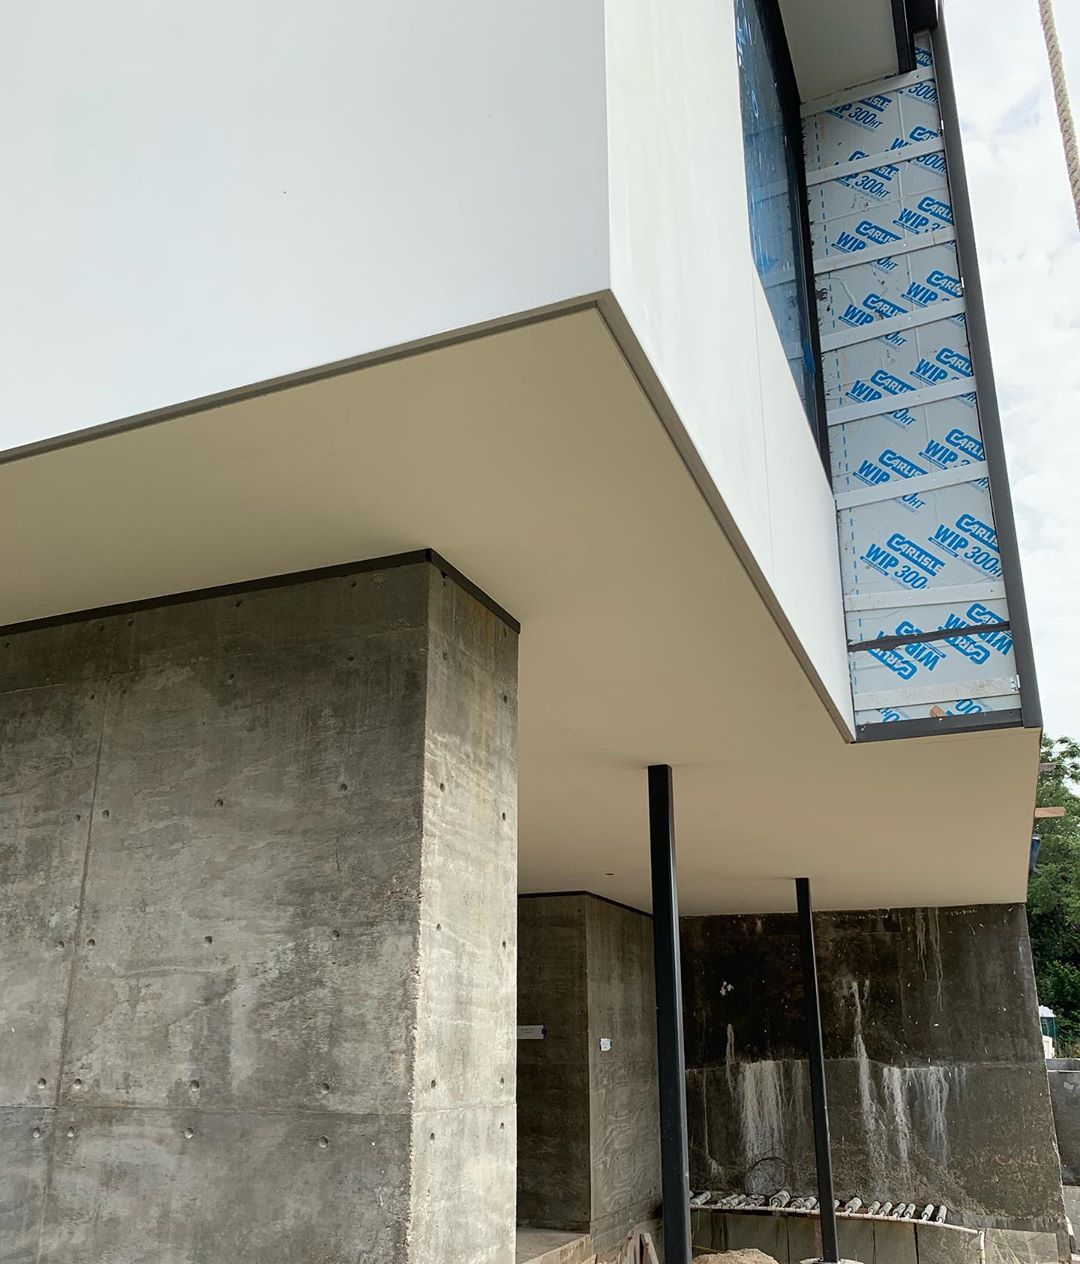 Always love building when we can use best practices for waterproofing, flashing, and venting details. Designed by @laruearchitects Interiors by @lovecounty Built by @foursquarebuilders